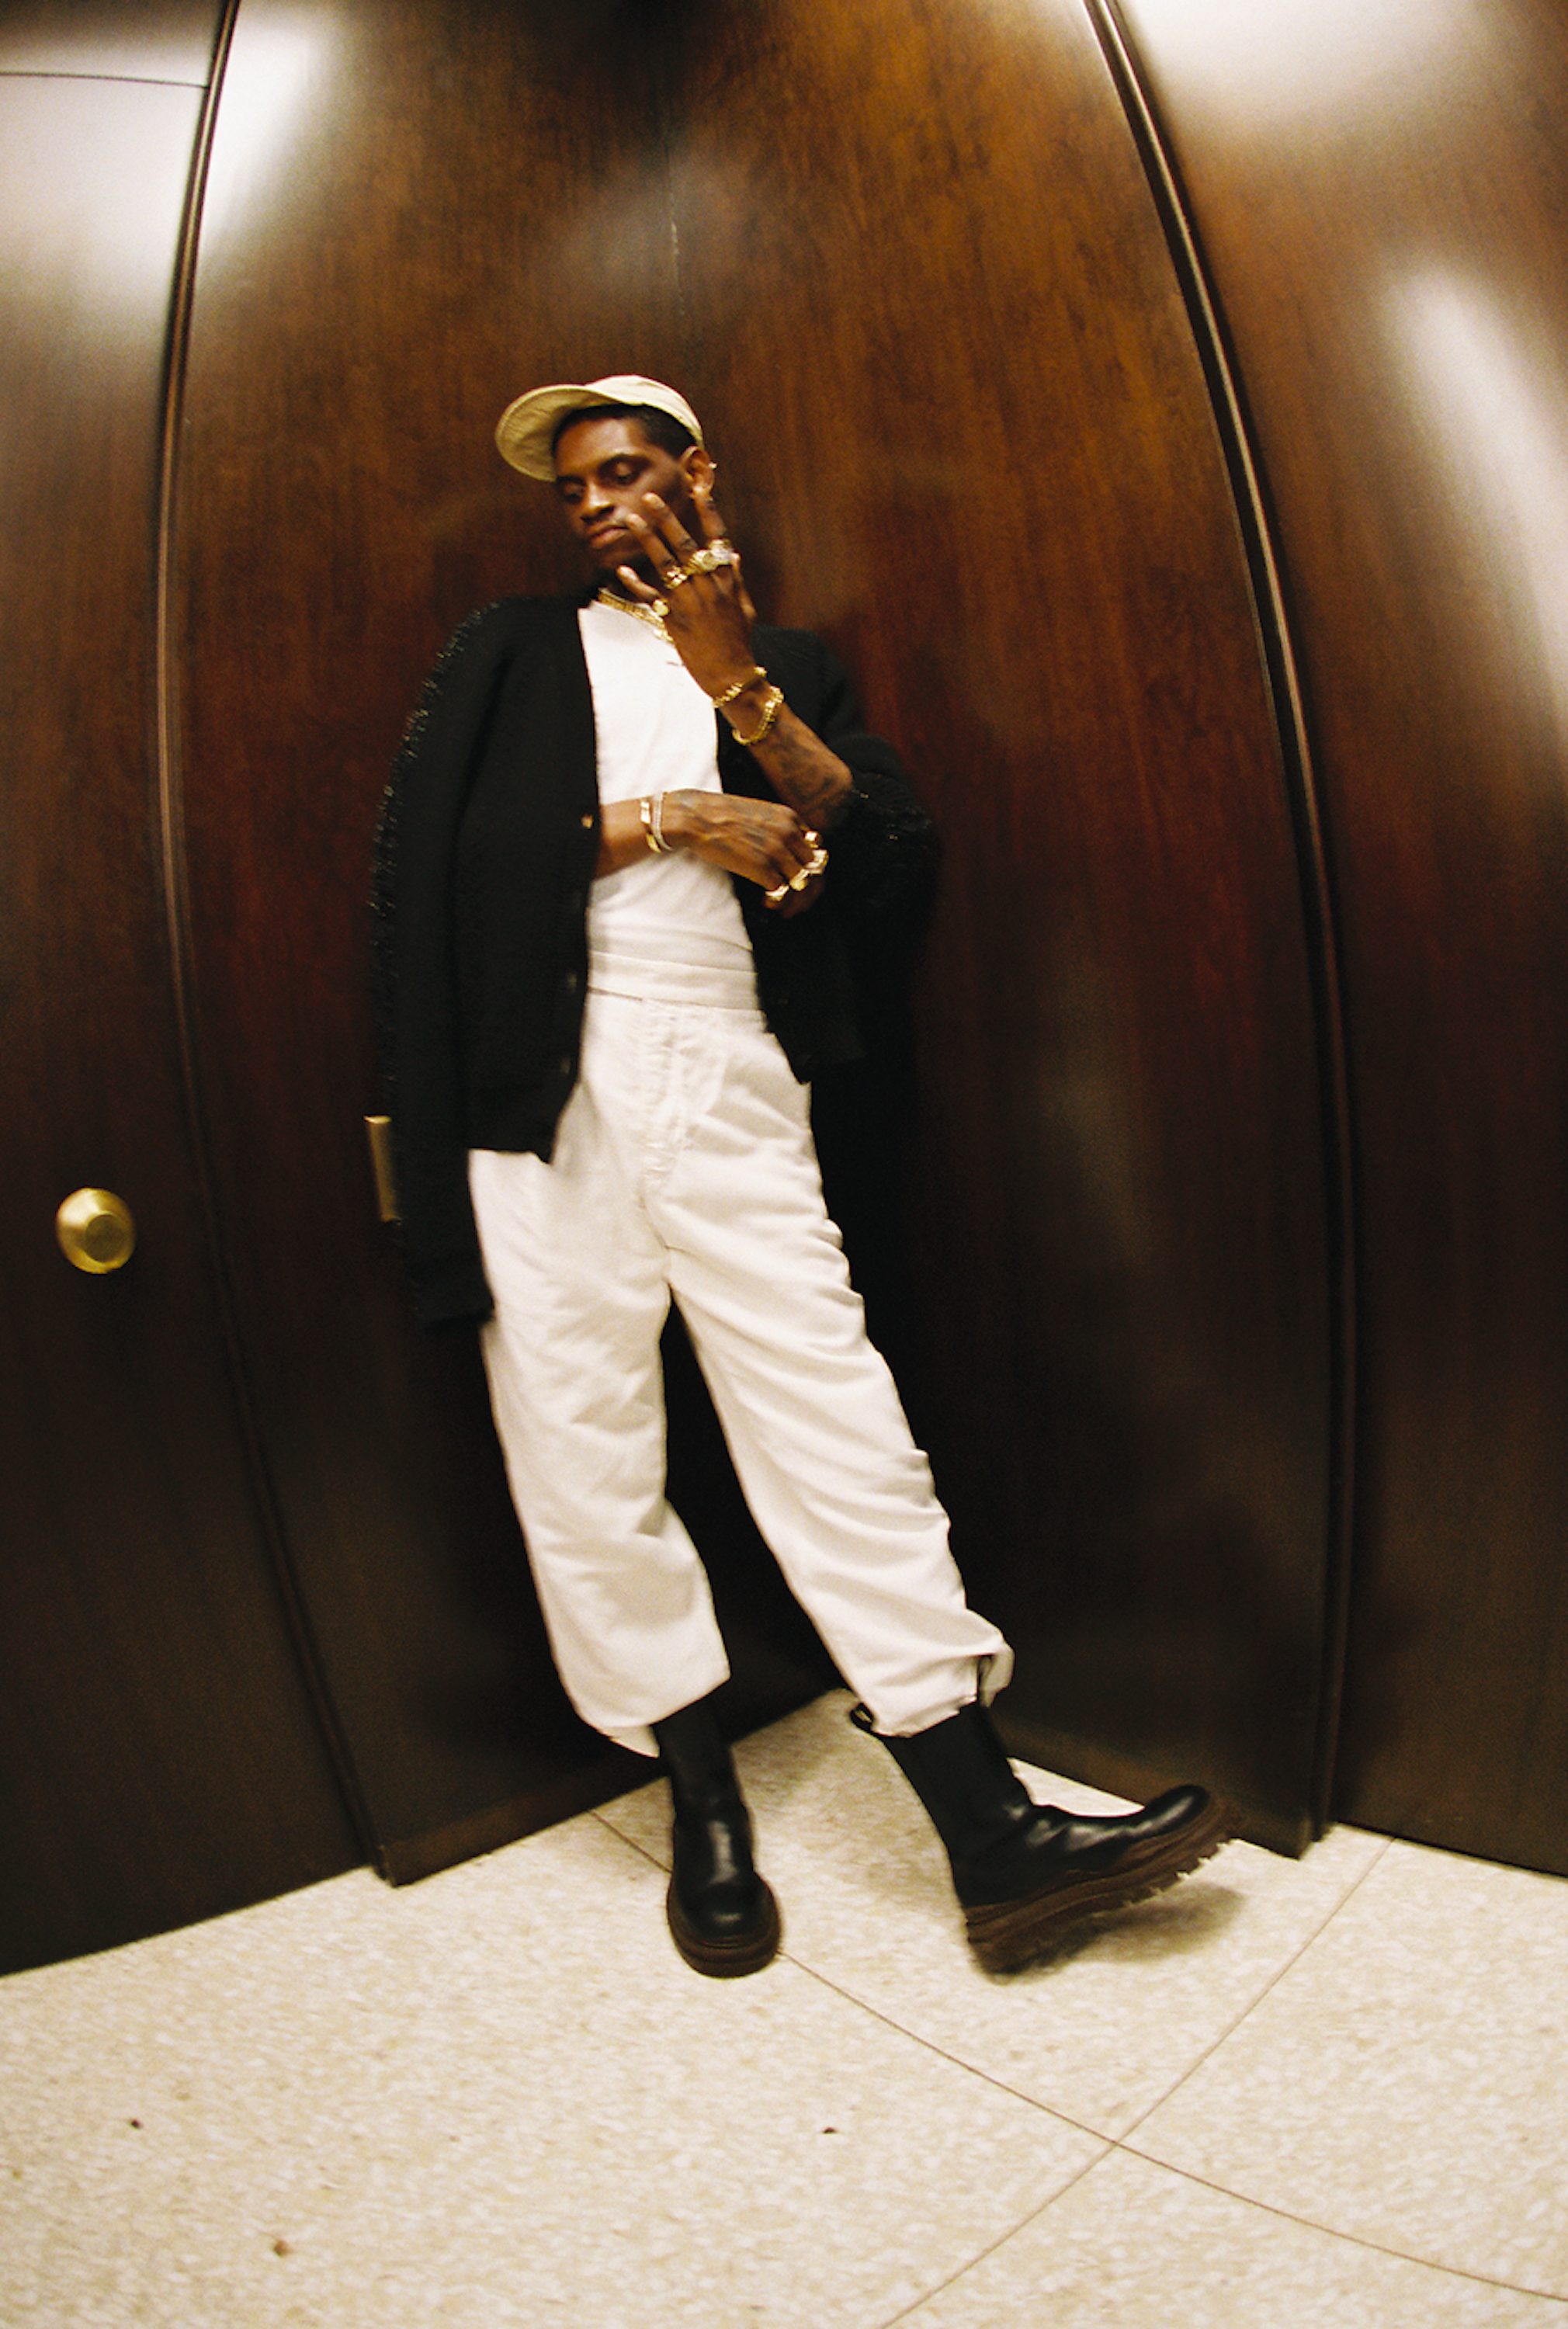 A $ AP Nast in the elevator photographed by Bladimir Corniel